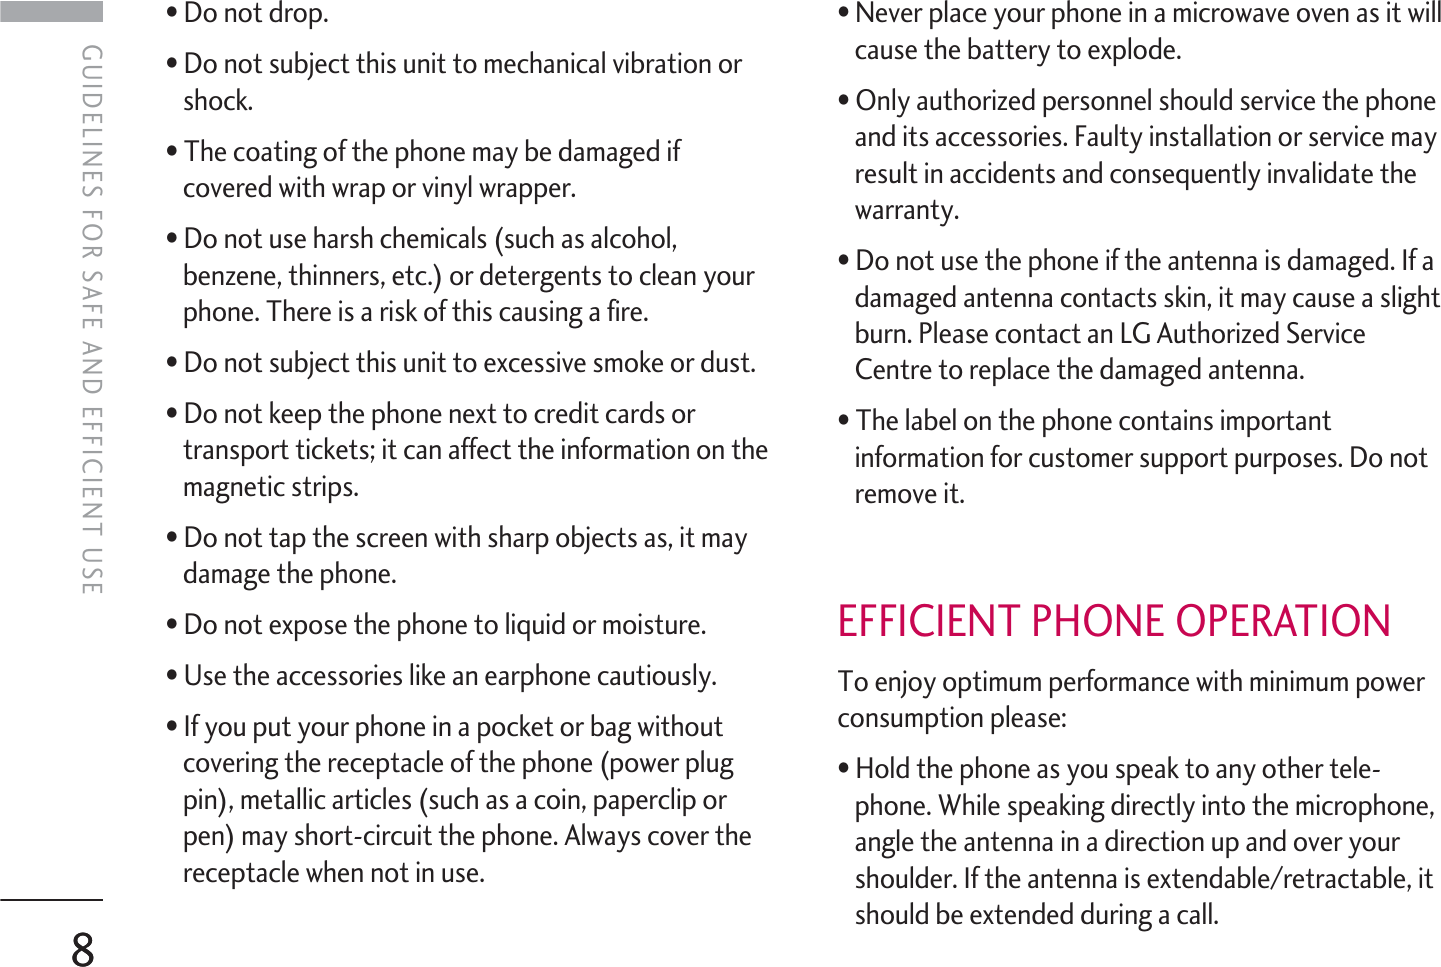 8GUIDELINES FOR SAFE AND EFFICIENT USE• Do not drop.• Do not subject this unit to mechanical vibration orshock.• The coating of the phone may be damaged ifcovered with wrap or vinyl wrapper.• Do not use harsh chemicals (such as alcohol,benzene, thinners, etc.) or detergents to clean yourphone. There is a risk of this causing a fire.• Do not subject this unit to excessive smoke or dust.• Do not keep the phone next to credit cards ortransport tickets; it can affect the information on themagnetic strips.• Do not tap the screen with sharp objects as, it maydamage the phone.• Do not expose the phone to liquid or moisture.• Use the accessories like an earphone cautiously.• If you put your phone in a pocket or bag withoutcovering the receptacle of the phone (power plugpin), metallic articles (such as a coin, paperclip orpen) may short-circuit the phone. Always cover thereceptacle when not in use.• Never place your phone in a microwave oven as it willcause the battery to explode.• Only authorized personnel should service the phoneand its accessories. Faulty installation or service mayresult in accidents and consequently invalidate thewarranty.• Do not use the phone if the antenna is damaged. If adamaged antenna contacts skin, it may cause a slightburn. Please contact an LG Authorized ServiceCentre to replace the damaged antenna.• The label on the phone contains importantinformation for customer support purposes. Do notremove it.EFFICIENT PHONE OPERATIONTo enjoy optimum performance with minimum powerconsumption please:• Hold the phone as you speak to any other tele-phone. While speaking directly into the microphone,angle the antenna in a direction up and over yourshoulder. If the antenna is extendable/retractable, itshould be extended during a call.8GUIDELINES FOR SAFE AND EFFICIENT USE